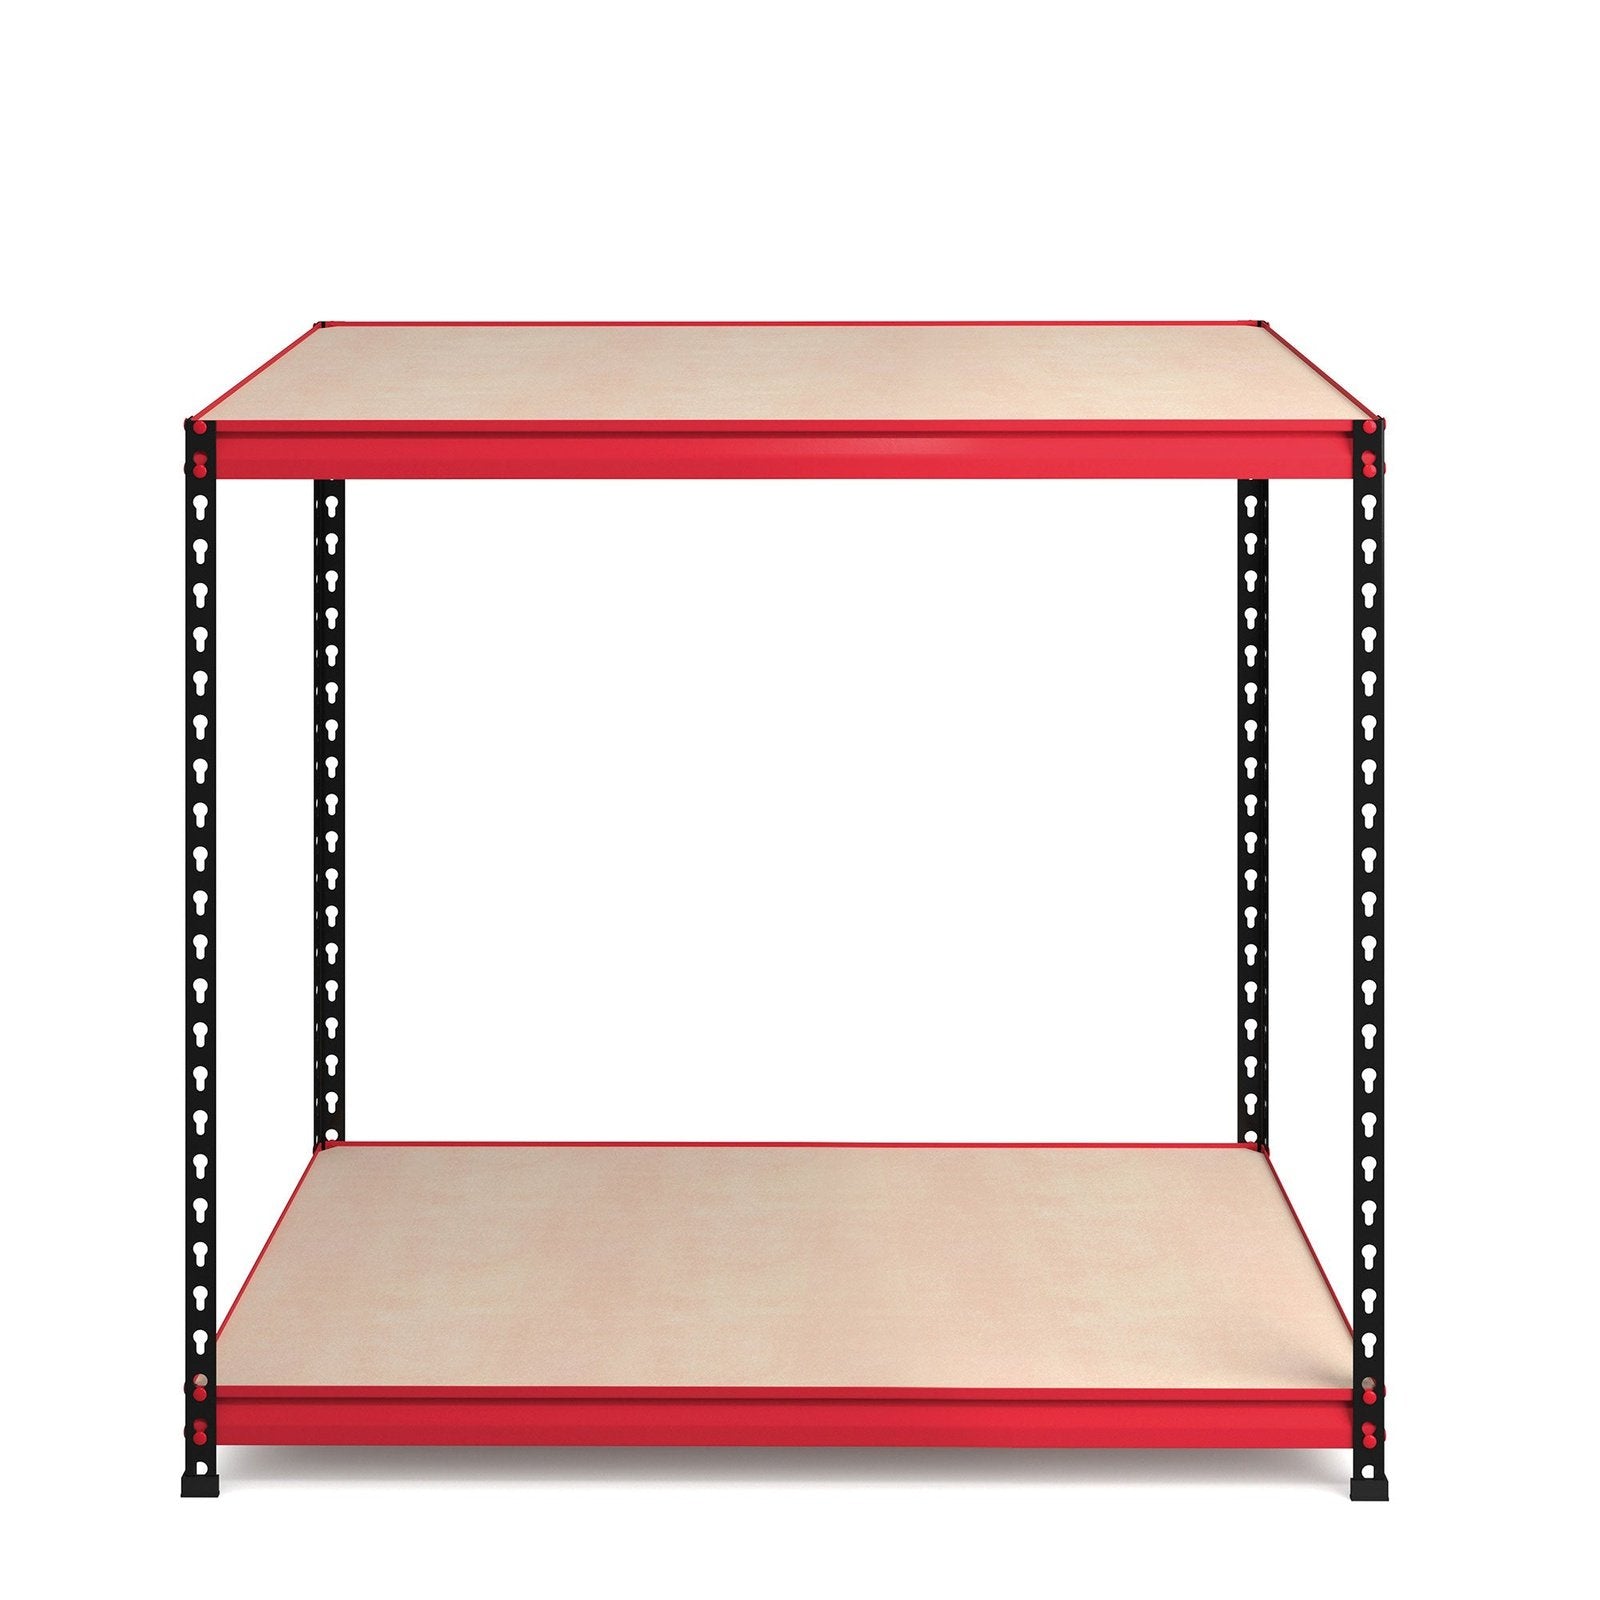 RB Boss FastLok 2x Tier Boltless Workstation - 900x900x600mm 300kgs UDL - Office Products Online